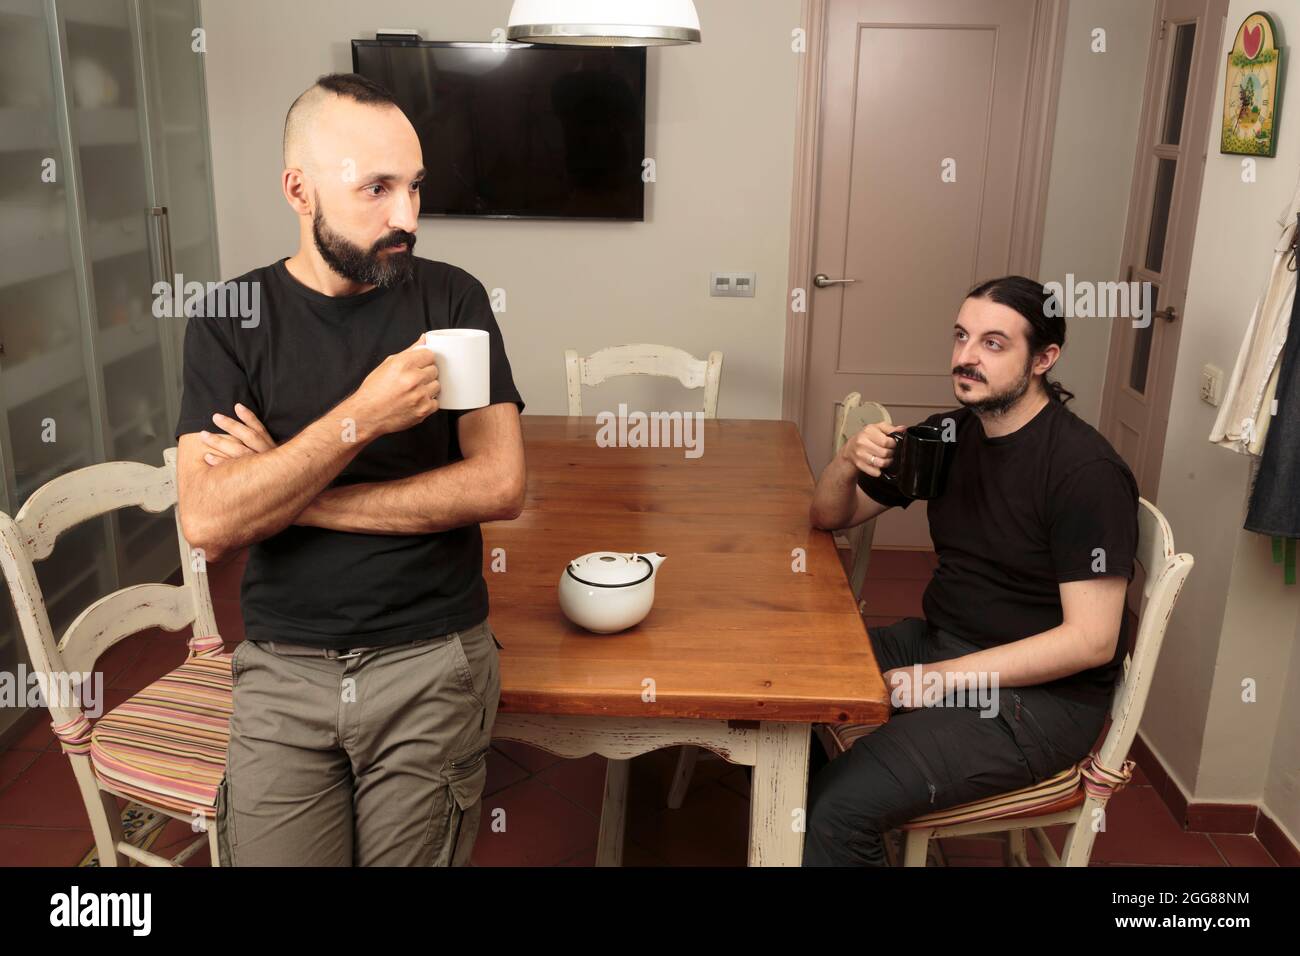 Two young men quietly drinking a hot beverage together Stock Photo